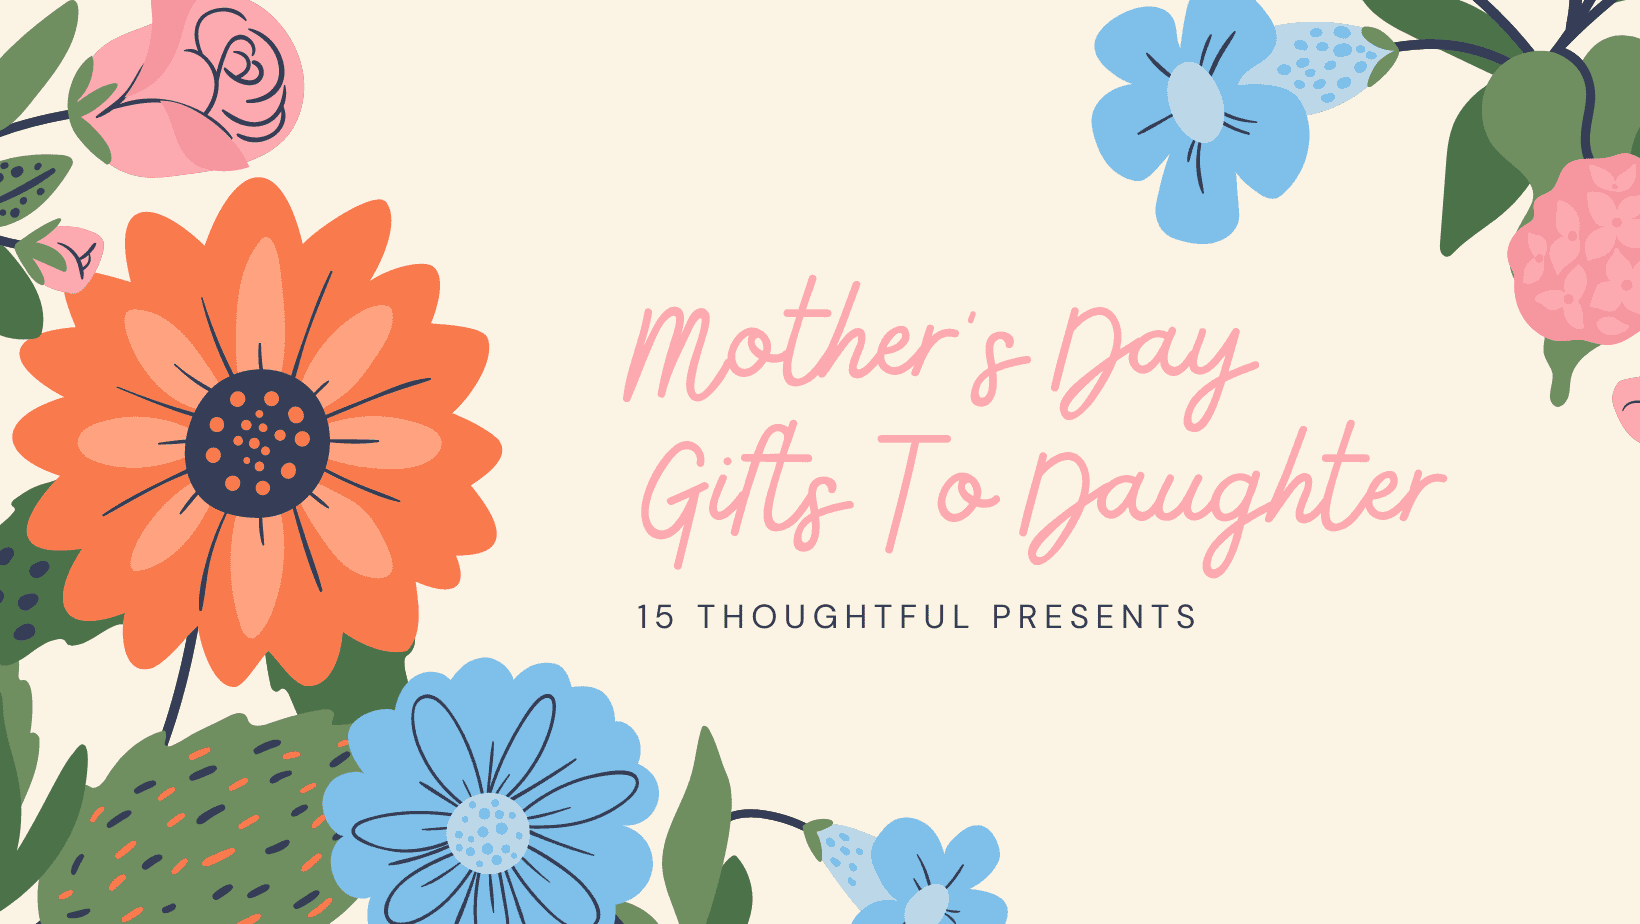 Mother's Day Gift Ideas for Daughter